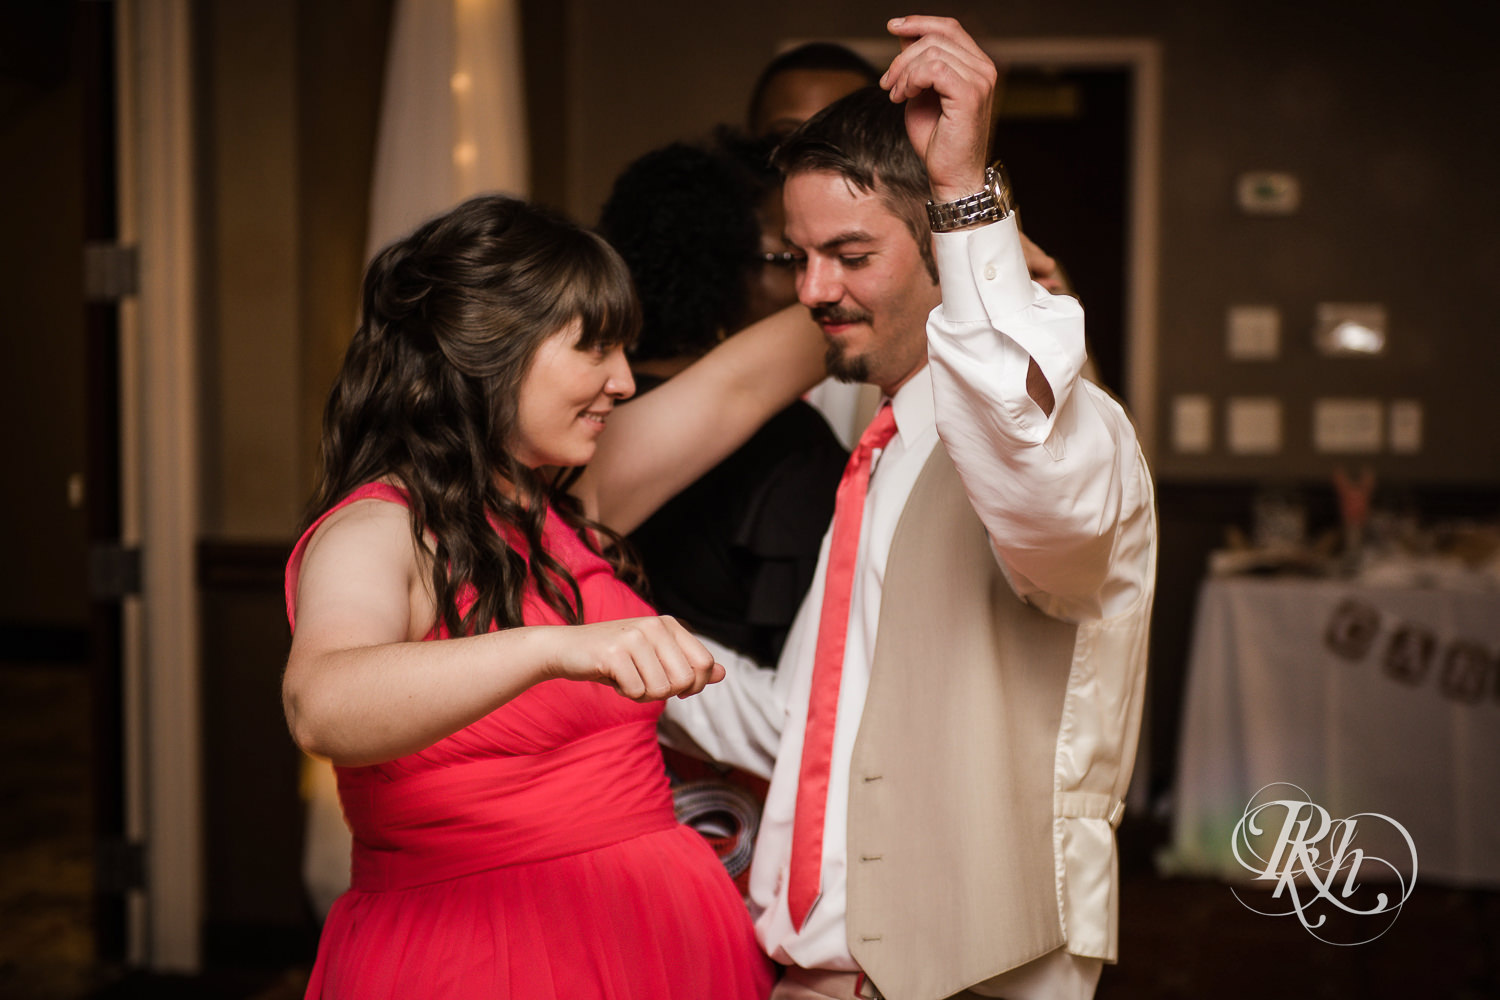 Guests dance during wedding reception at North Metro Event Center in Shoreview, Minnesota.